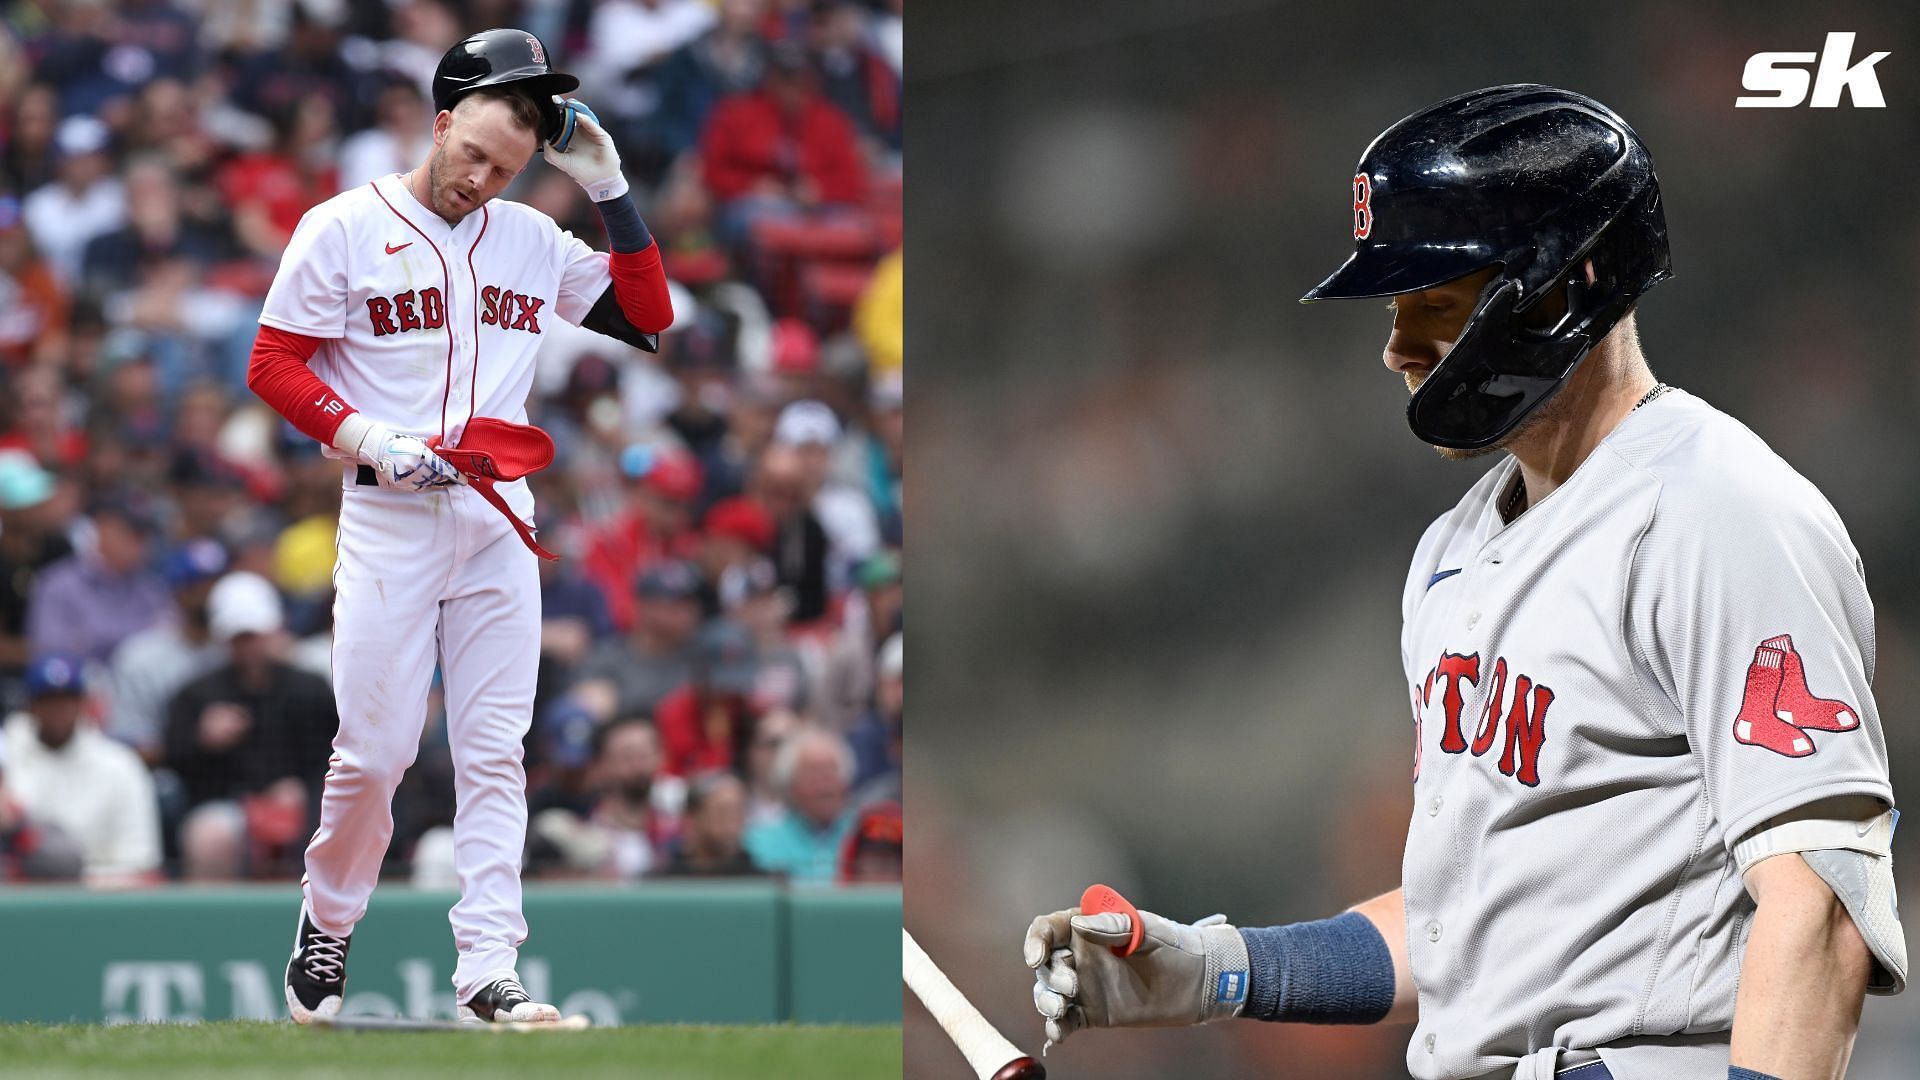 Trevor Story has incredible game as the Boston Red Sox offense